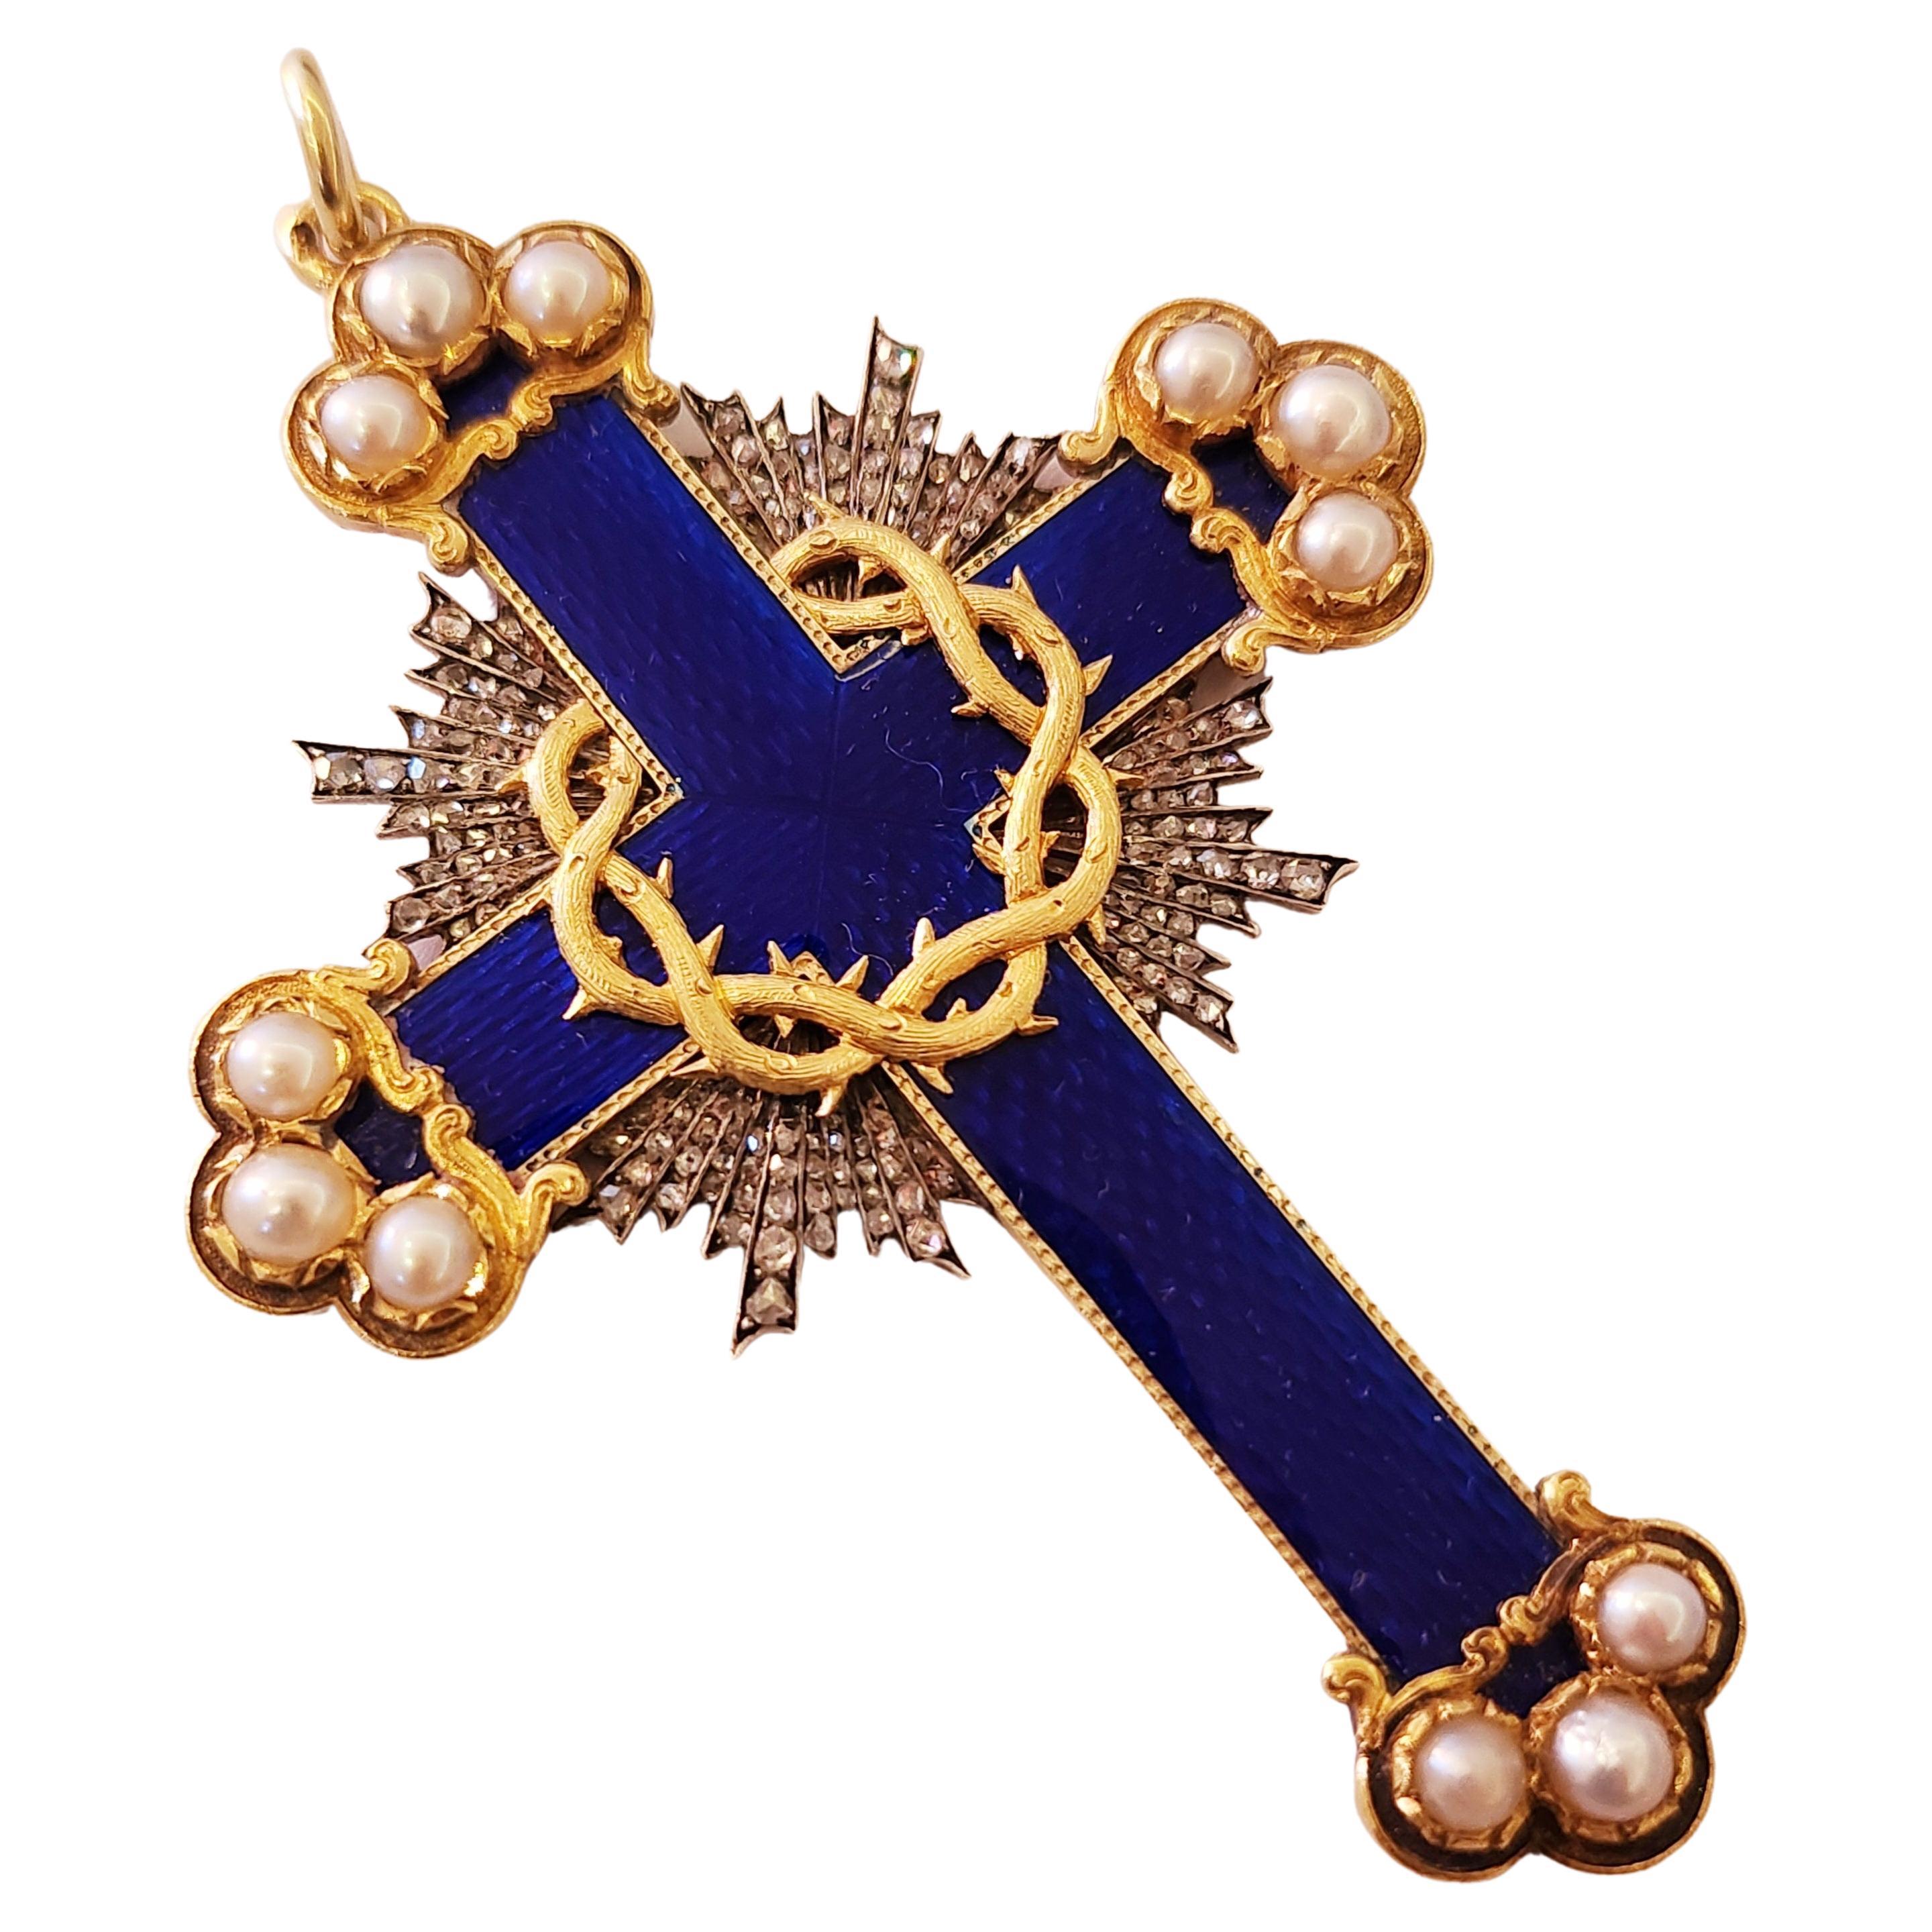 Antique 14k gold large russian cross pendant in blue guilloche enamel with rose cut diamonds estimate weight of 2 carats and 12 white natural pearls this unuswal cross was made in st petersburg 1844.c during the imperial russian era with total